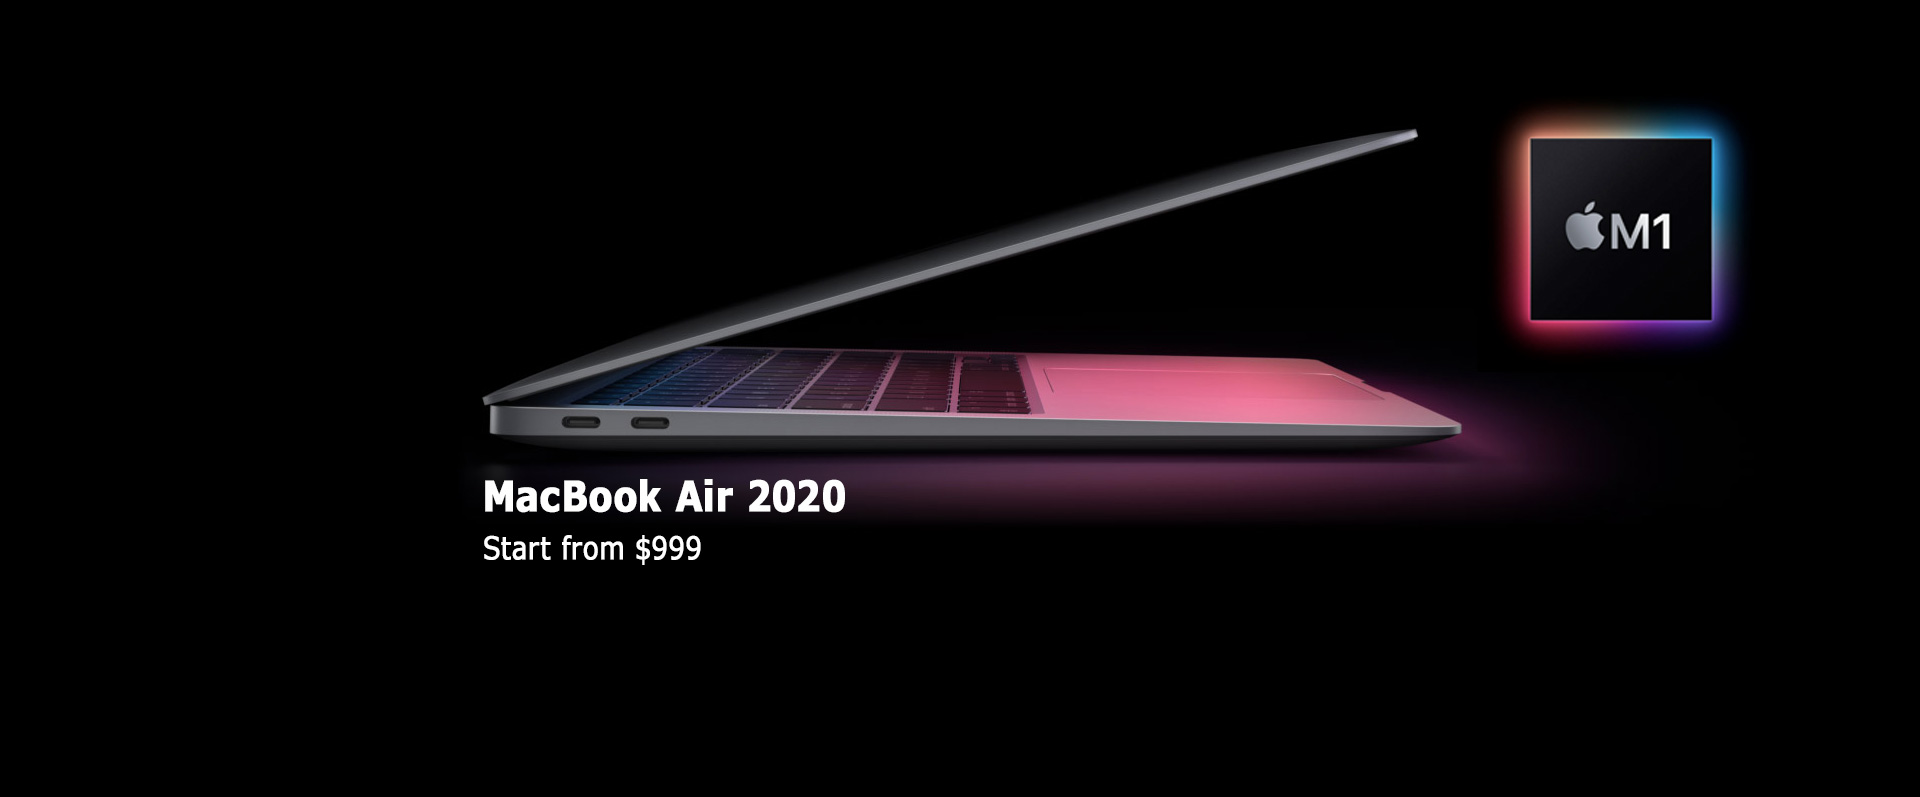 Macbook Air 2020 withM1 chip